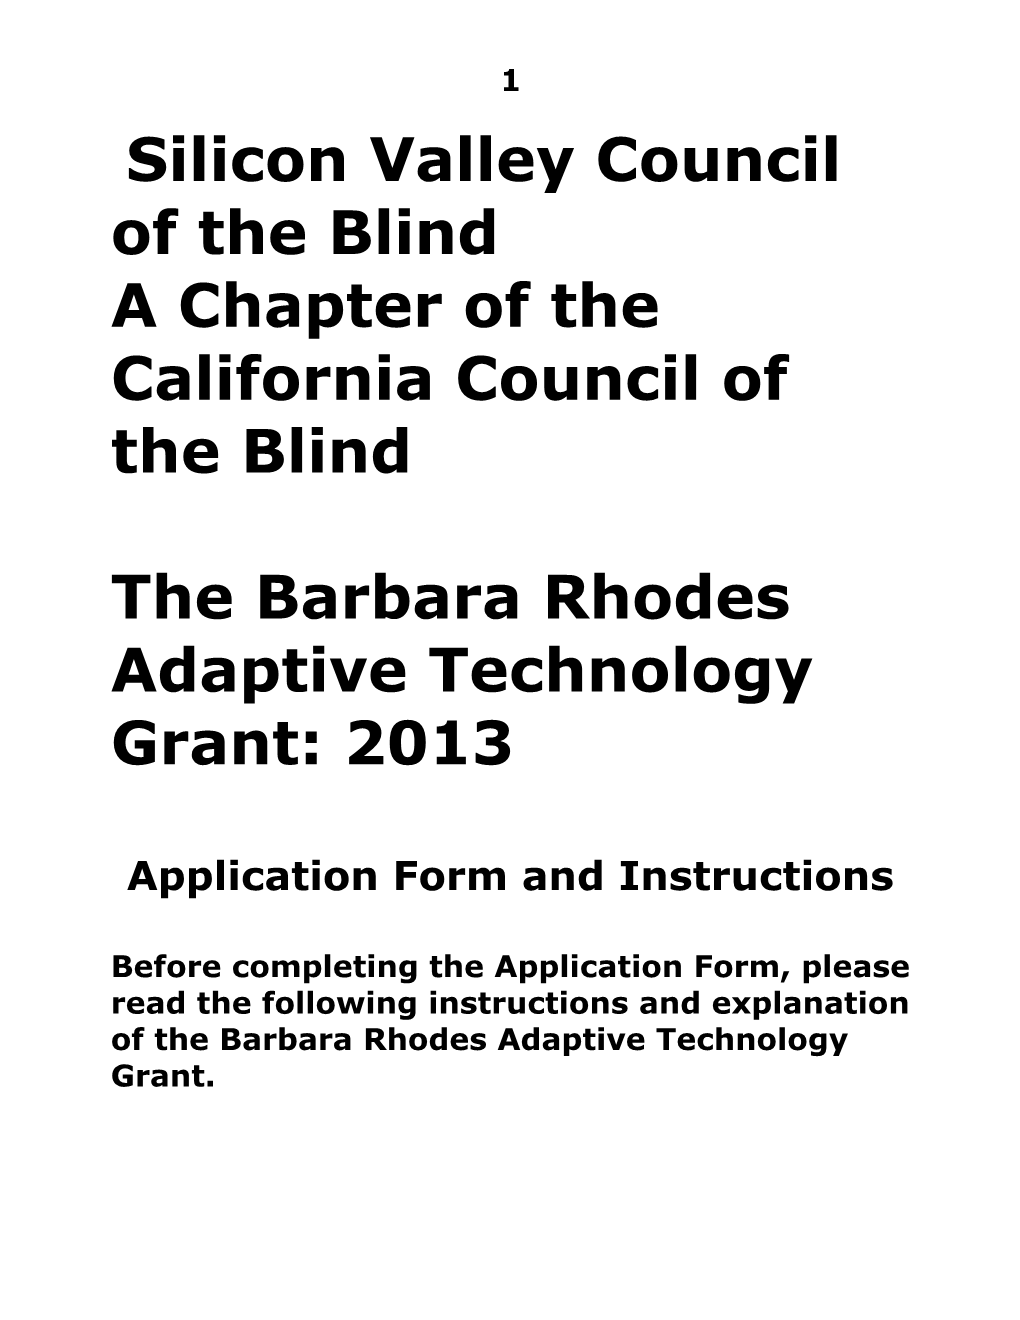 Silicon Valley Council of the Blind